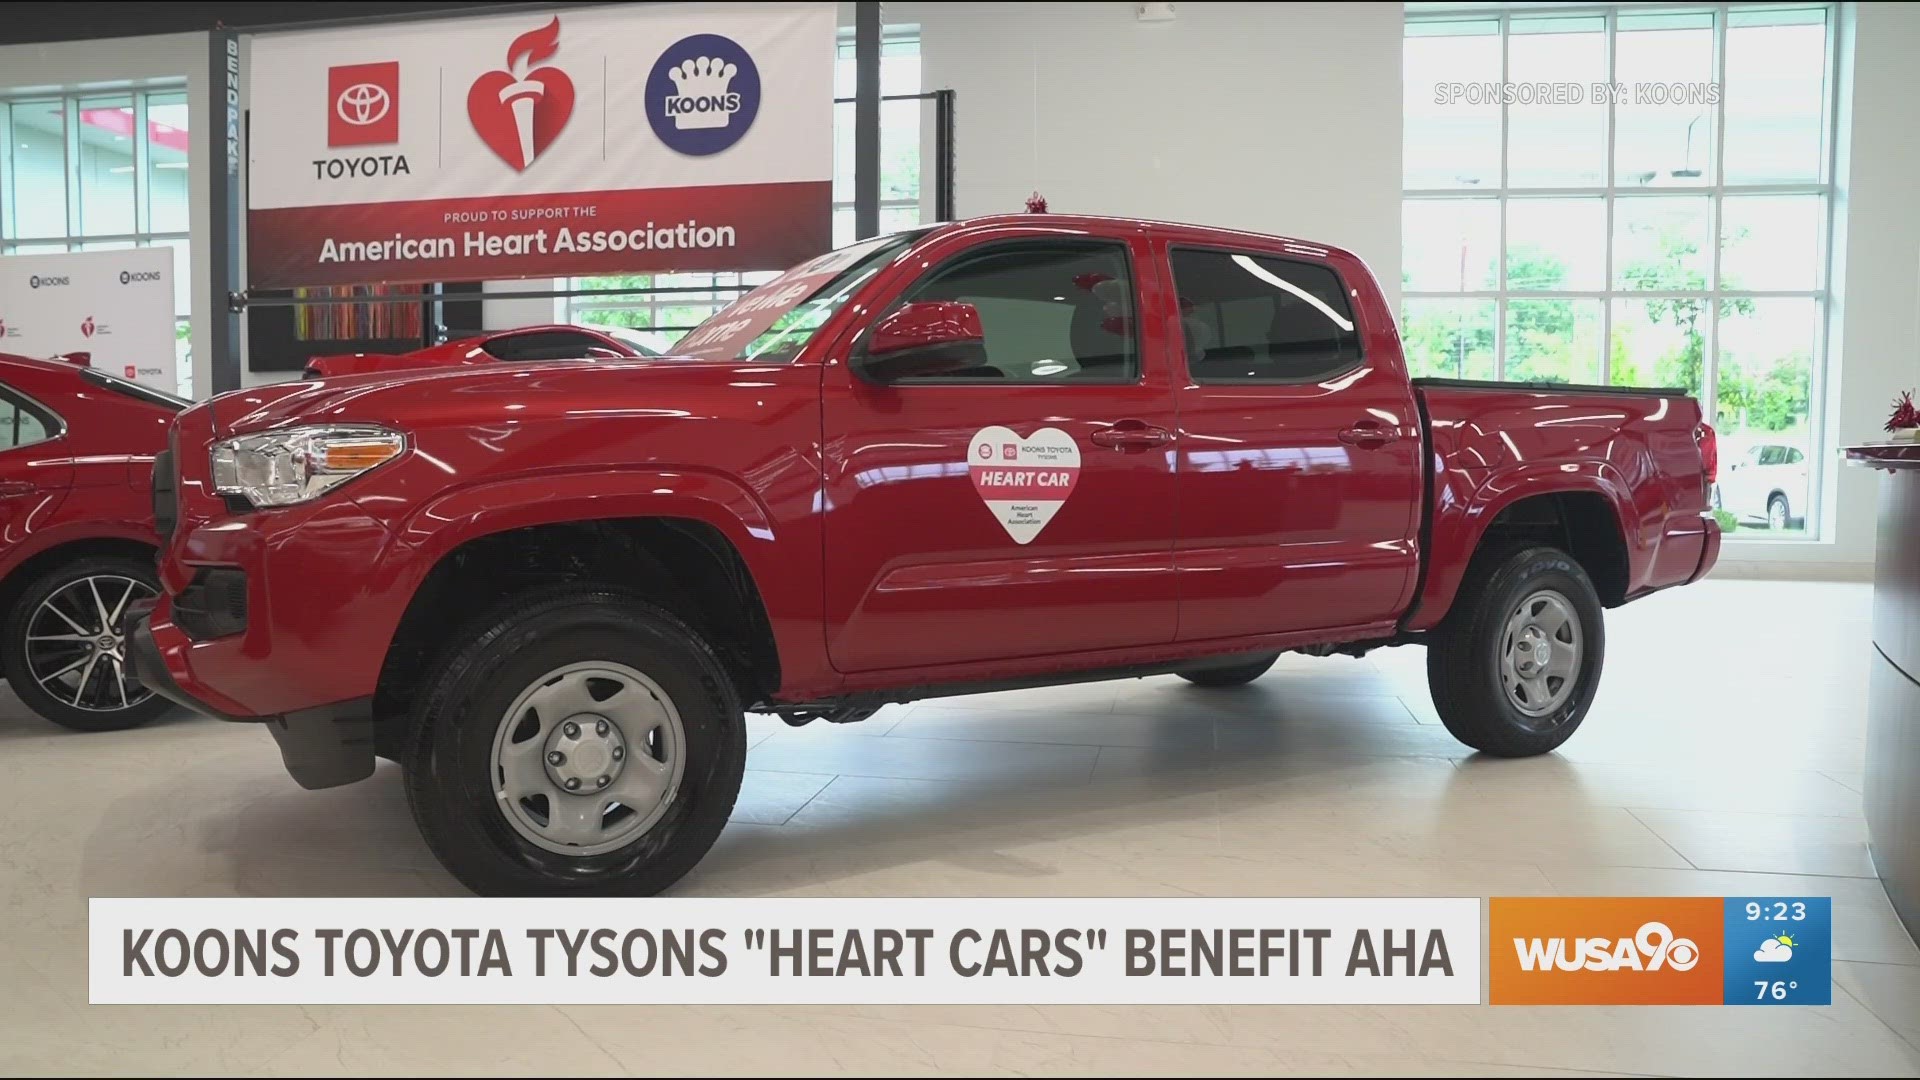 Sponsored by Koons. Krystal Koons explains how Toyota is donating special cars where the proceeds of the sales go to the American Heart Association.